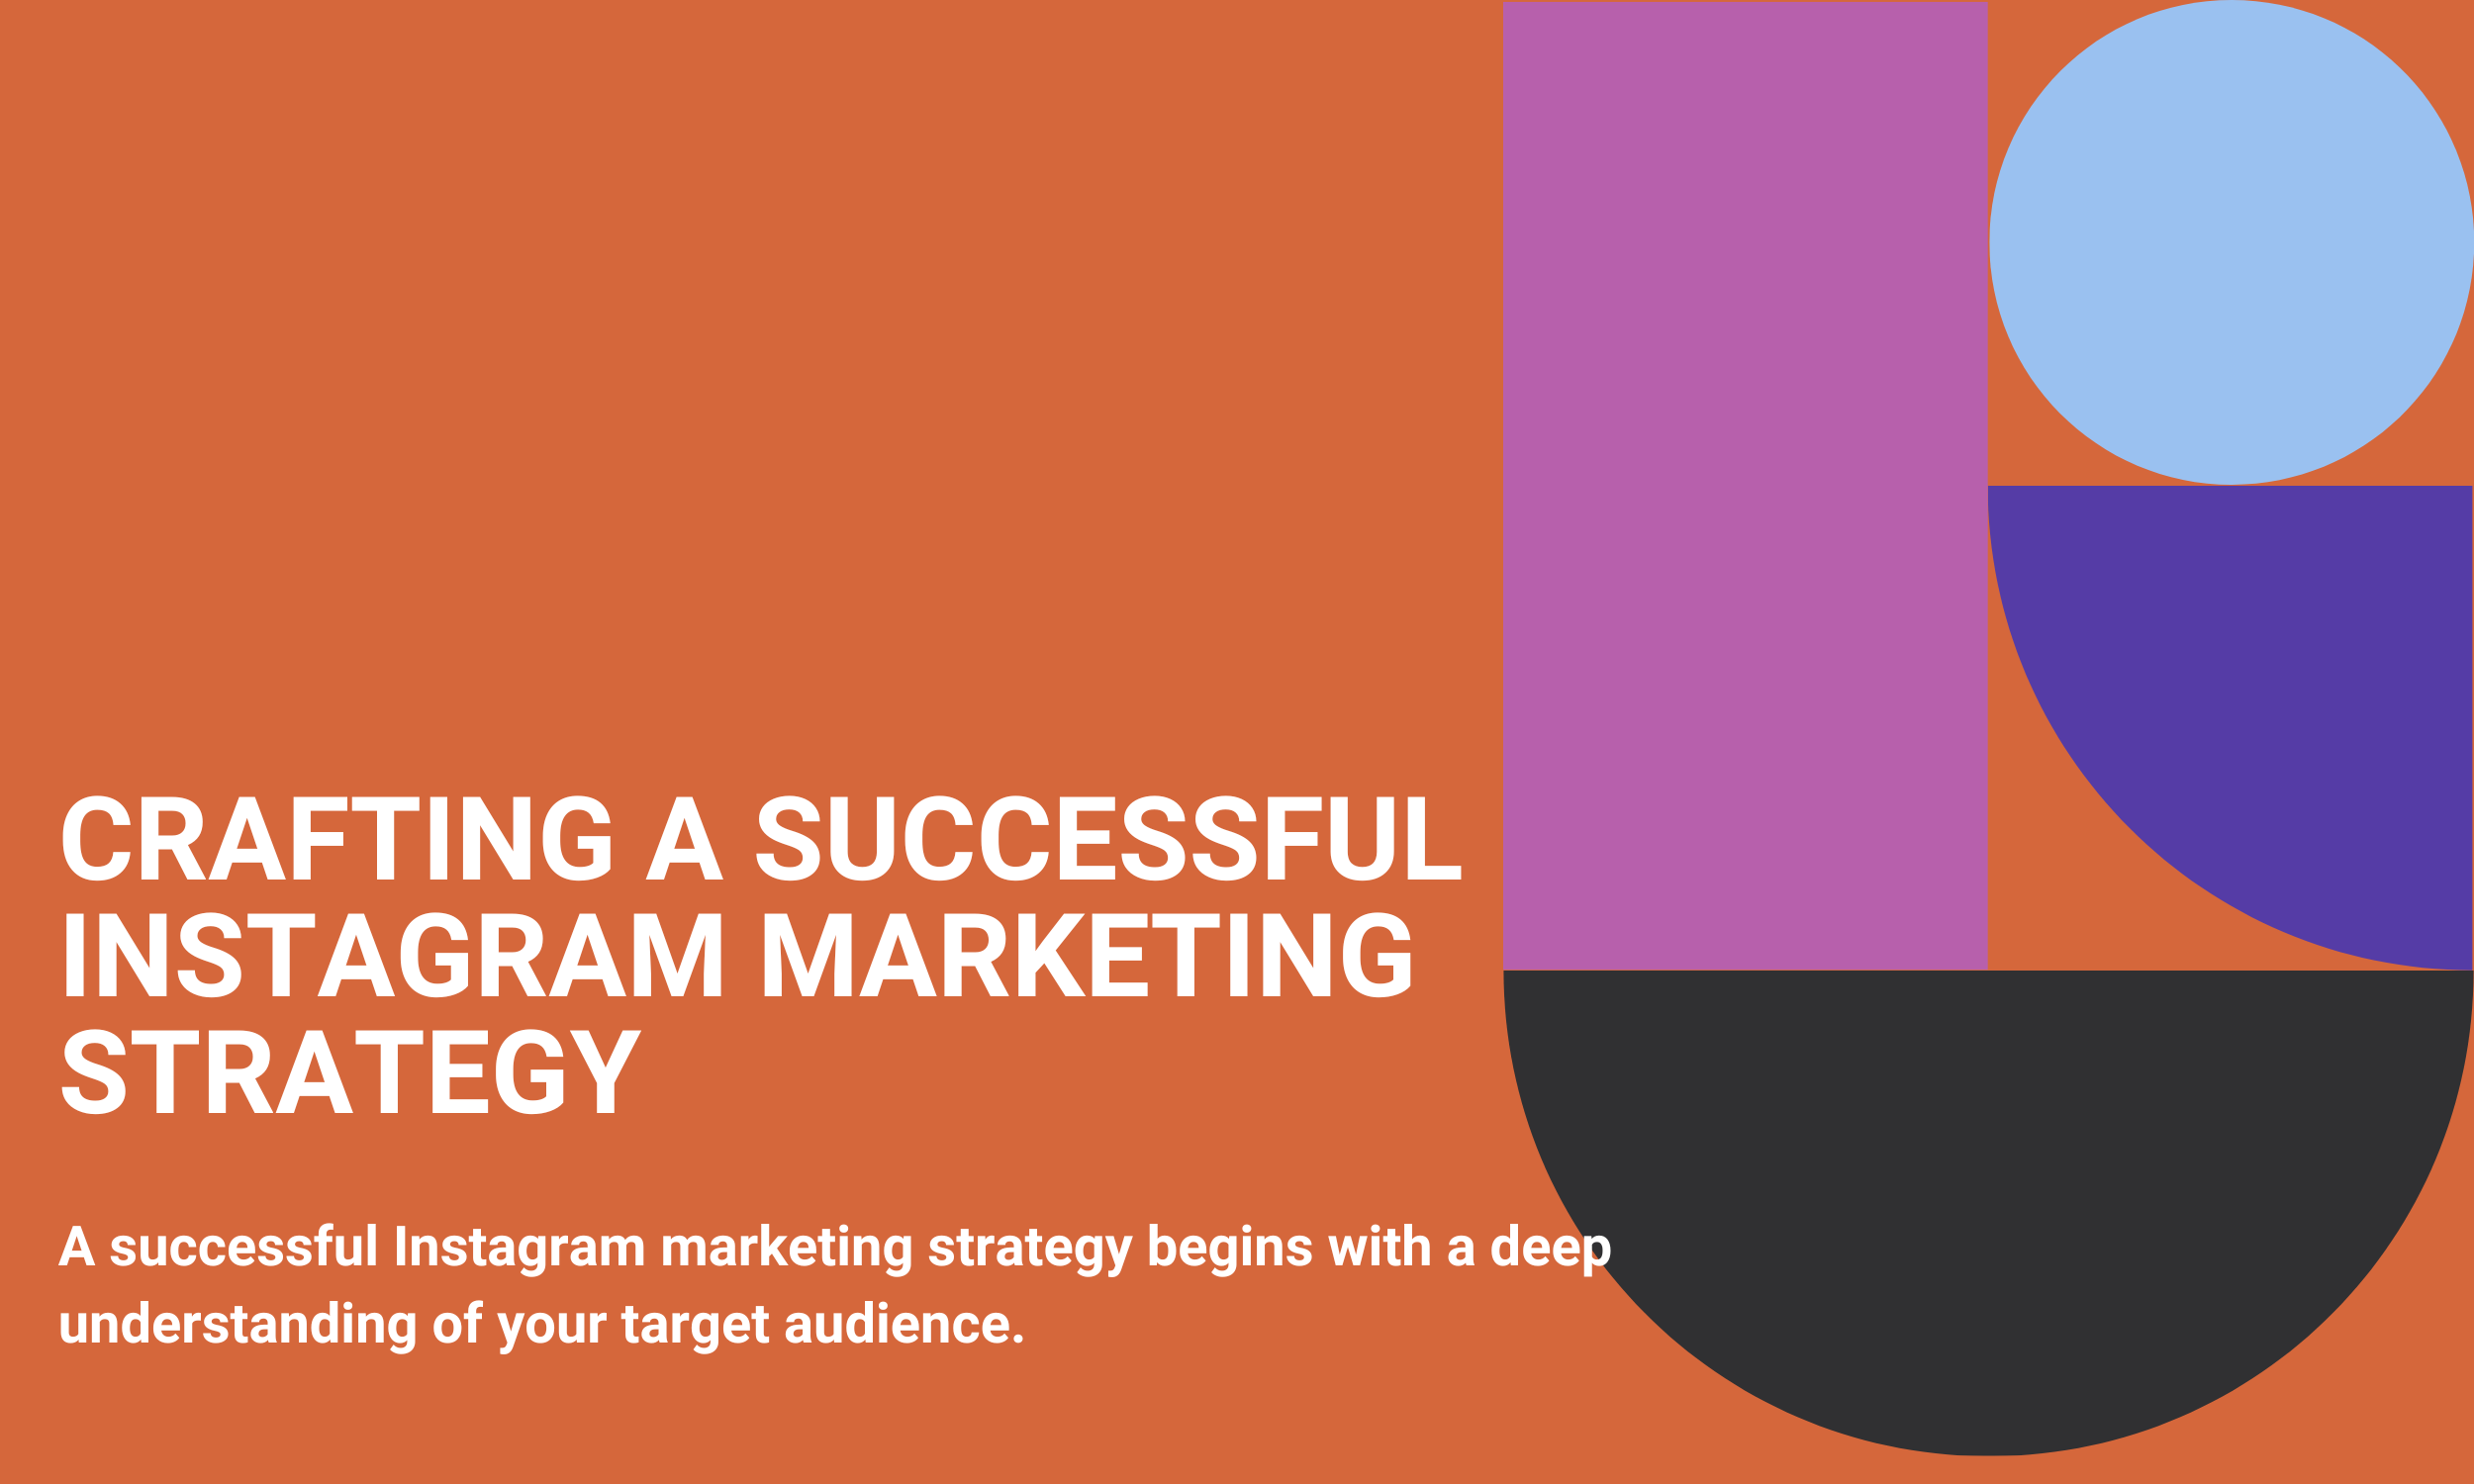 Crafting a Successful Instagram Marketing Strategy